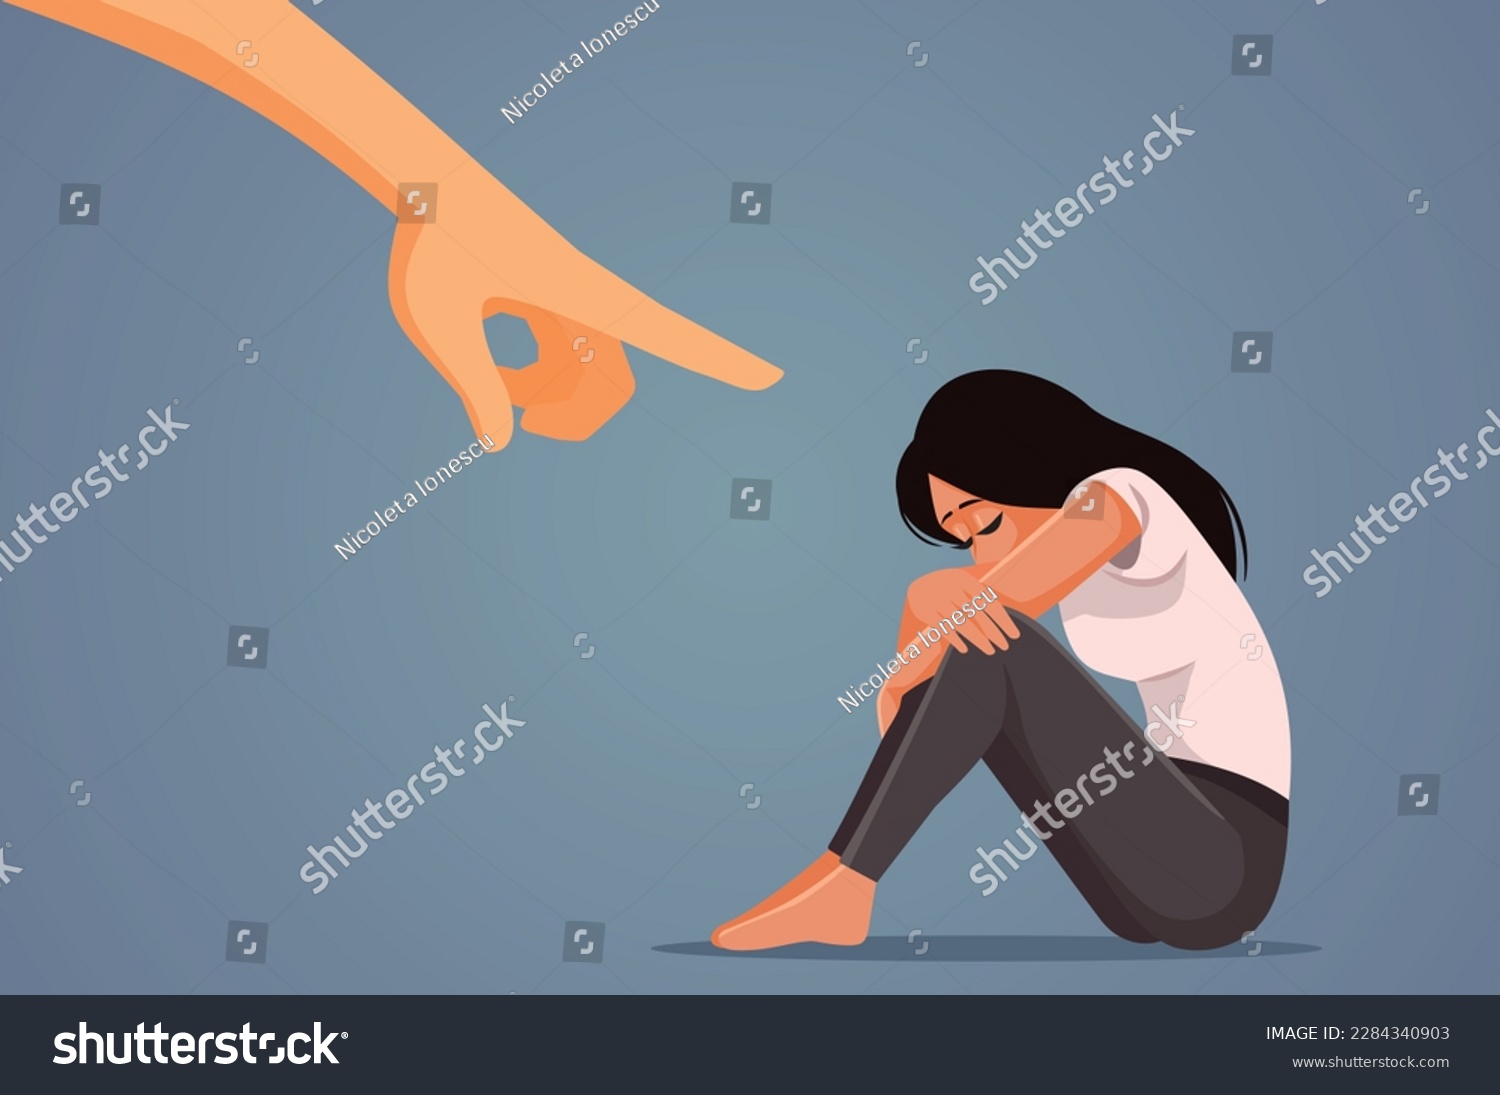 
Person Blaming the Victim for her Misfortune Vector Conceptual Illustration. Upset woman being accused and discriminated against in toxic relationship
 #2284340903